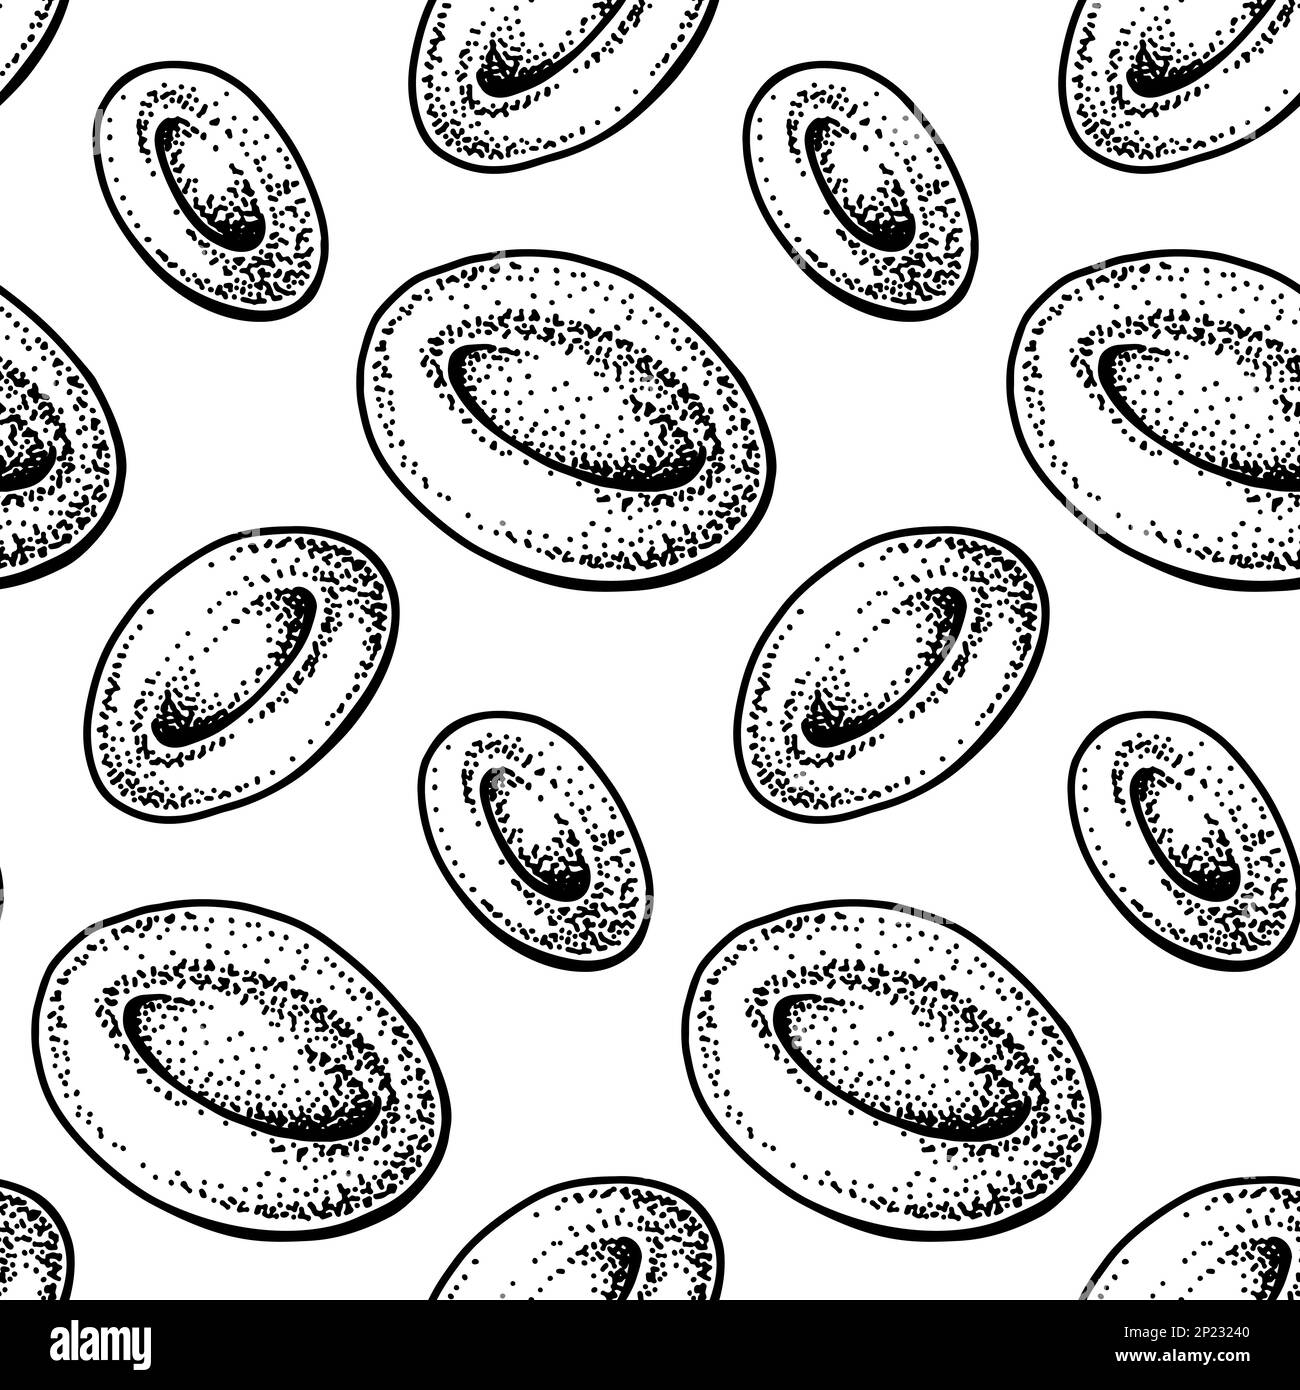 Red Blood cells seamless pattern. Hand drawn erythrocytes. Scientific biology illustration in sketch style Stock Vector